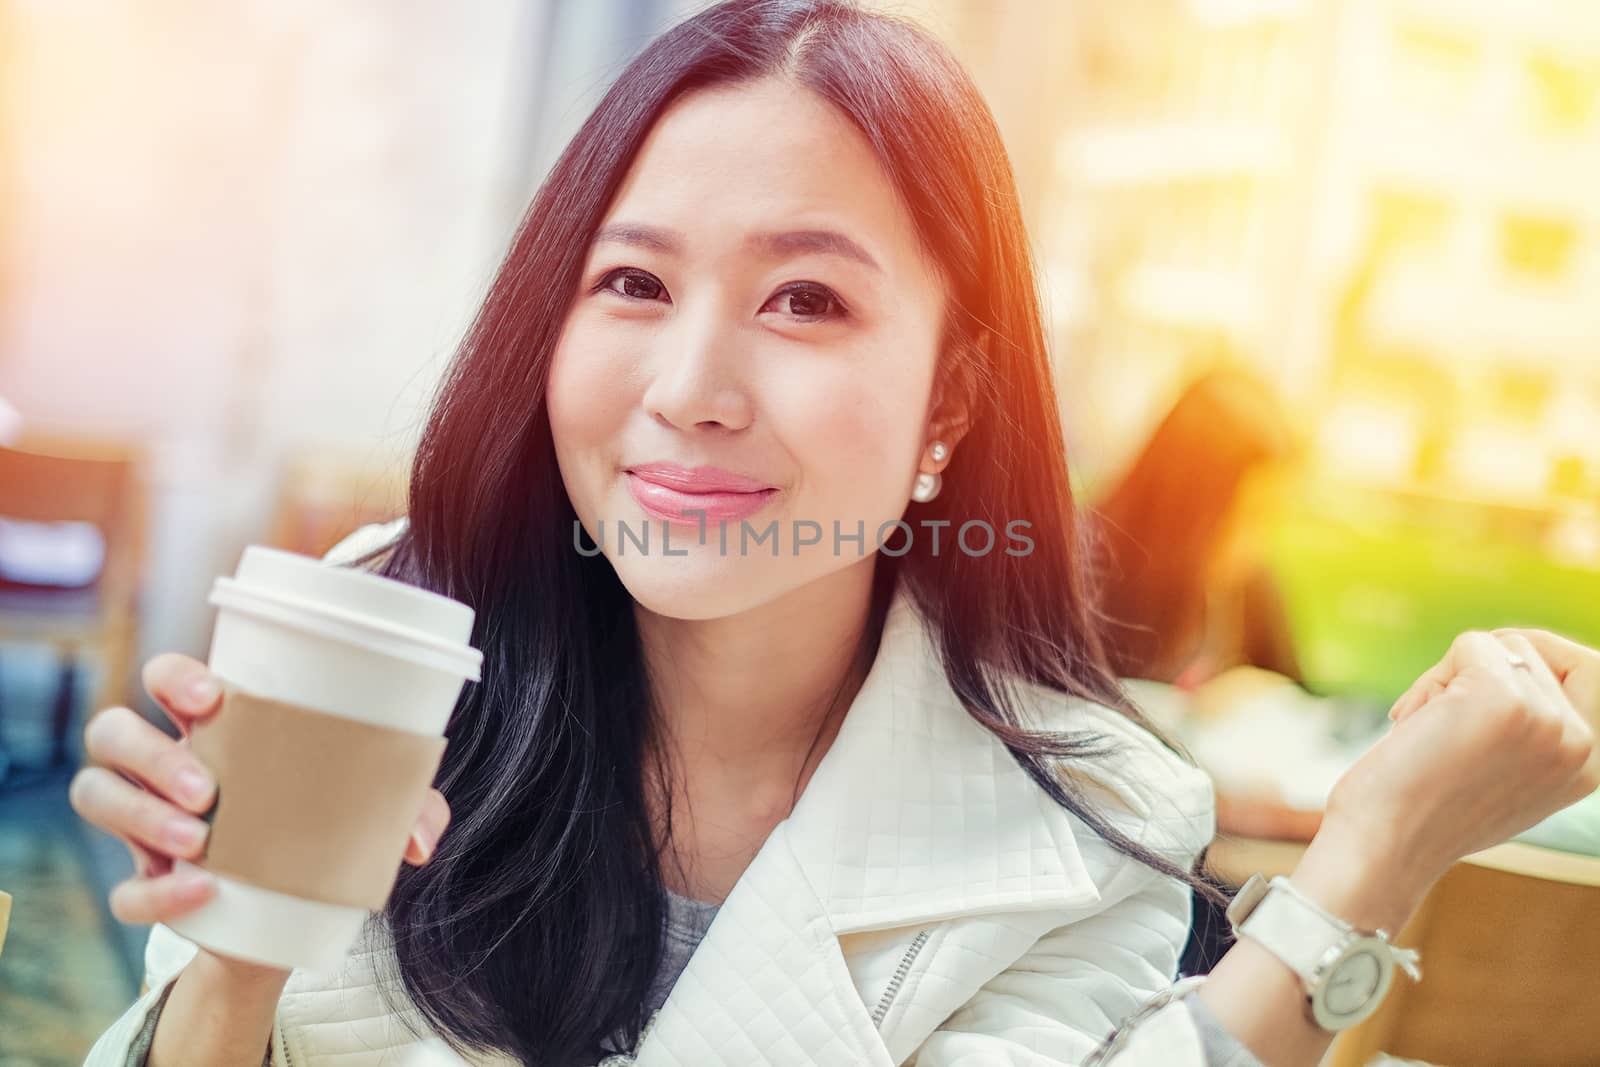 Woman drinking coffee at restaurant with sunrise streaming